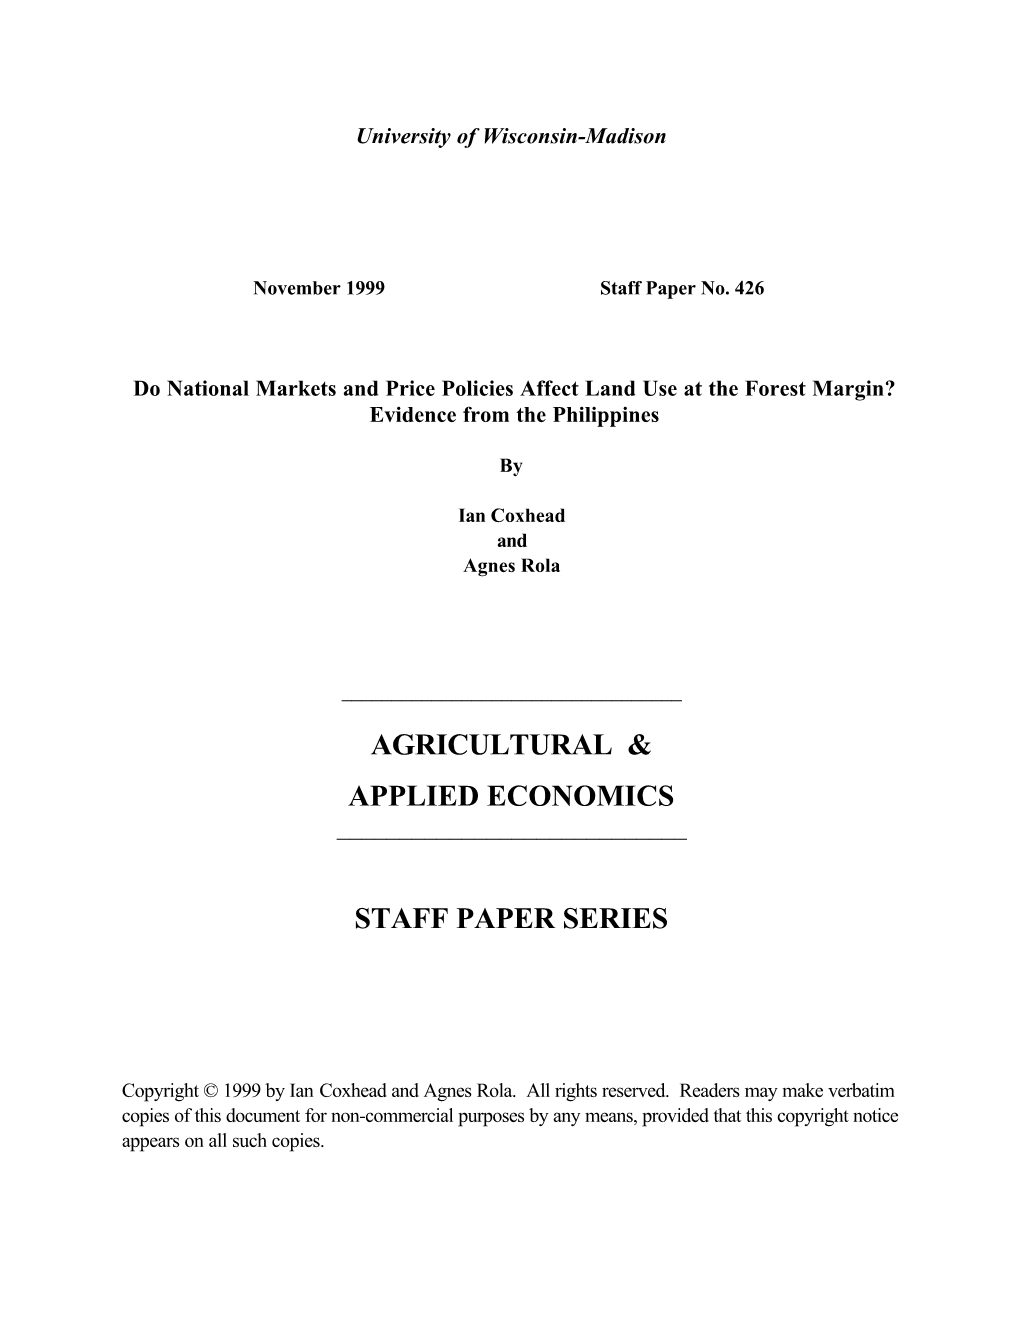 Agricultural & Applied Economics Staff Paper Series